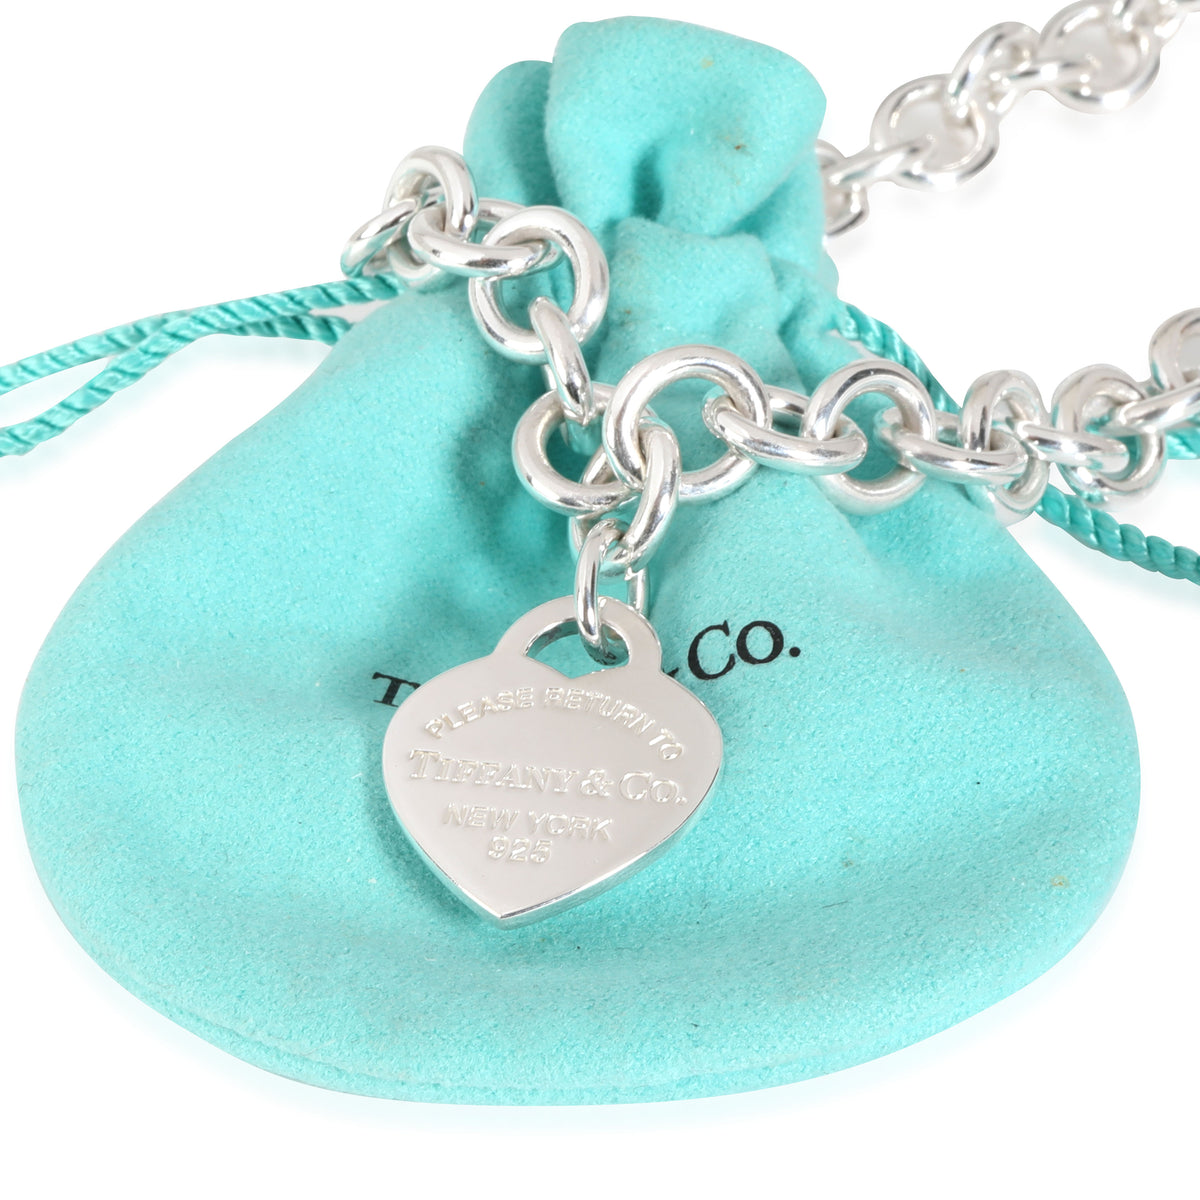 Tiffany & Co. Return To Tiffany Heart Tag Necklace in Sterling Silver